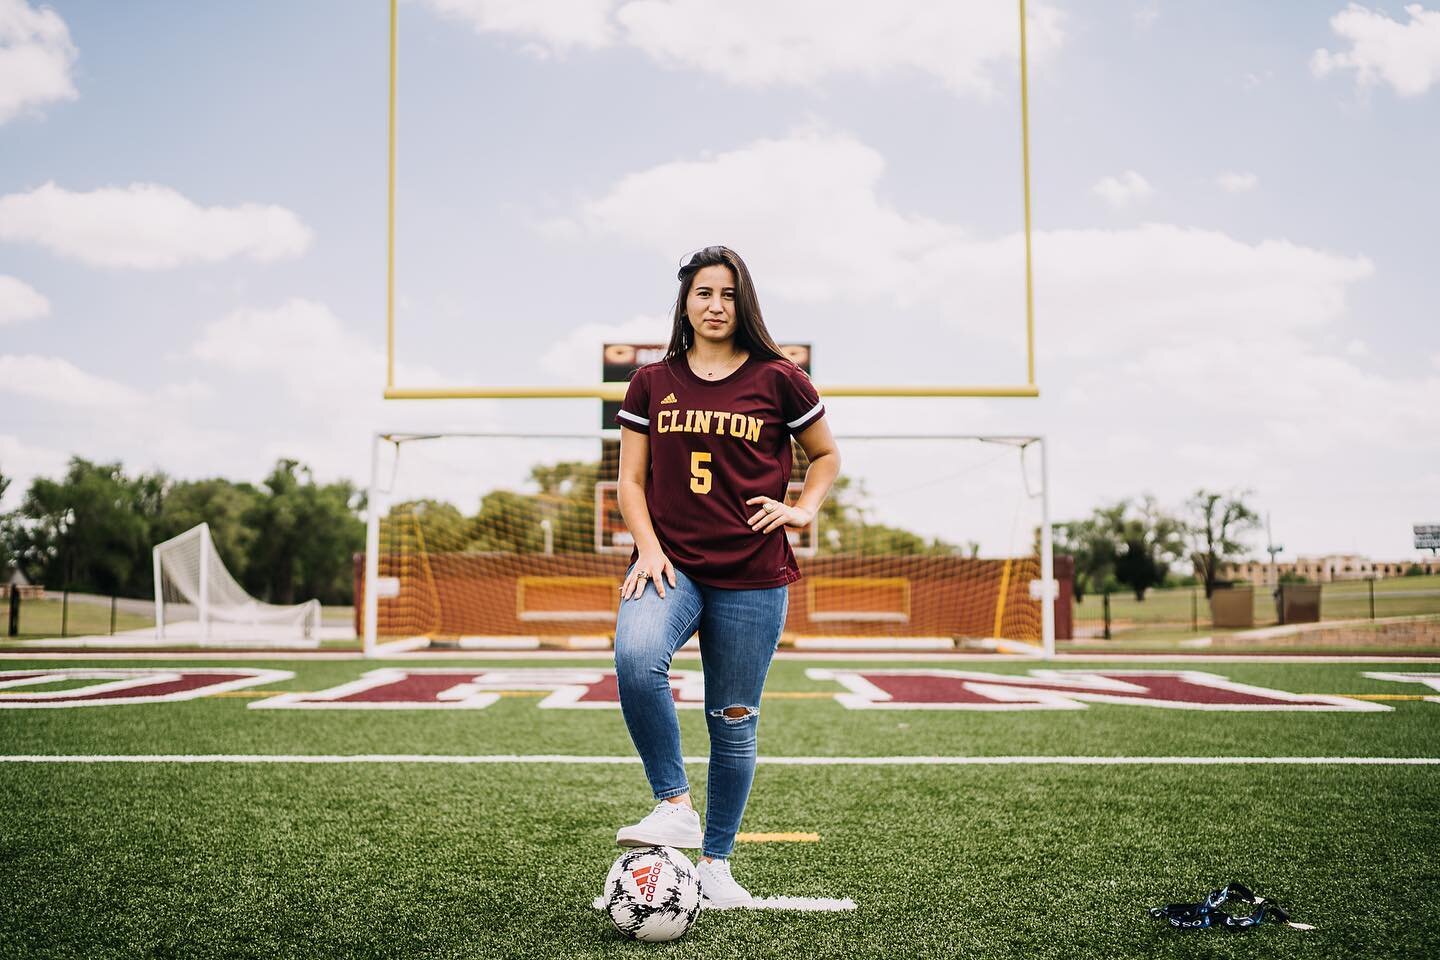 Getting geared up for the start of senior season. Booking now for 2022 High School &amp; College Seniors. Check out the link in my profile. 
.
.
.
.
www.ajstegall.com
#ajstegallphotography #seniorpictures #seniorportraits #seniorszn #soccer